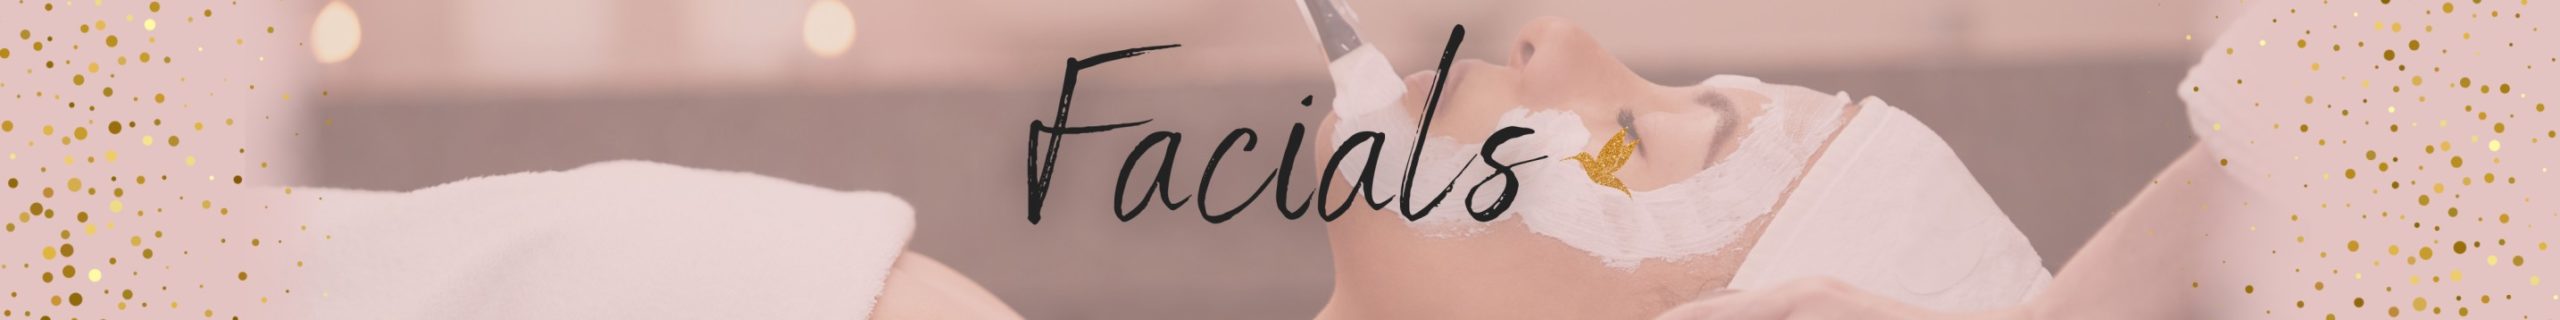 facials in Beleza Medical Aesthetics and Wellness in Severn, MD